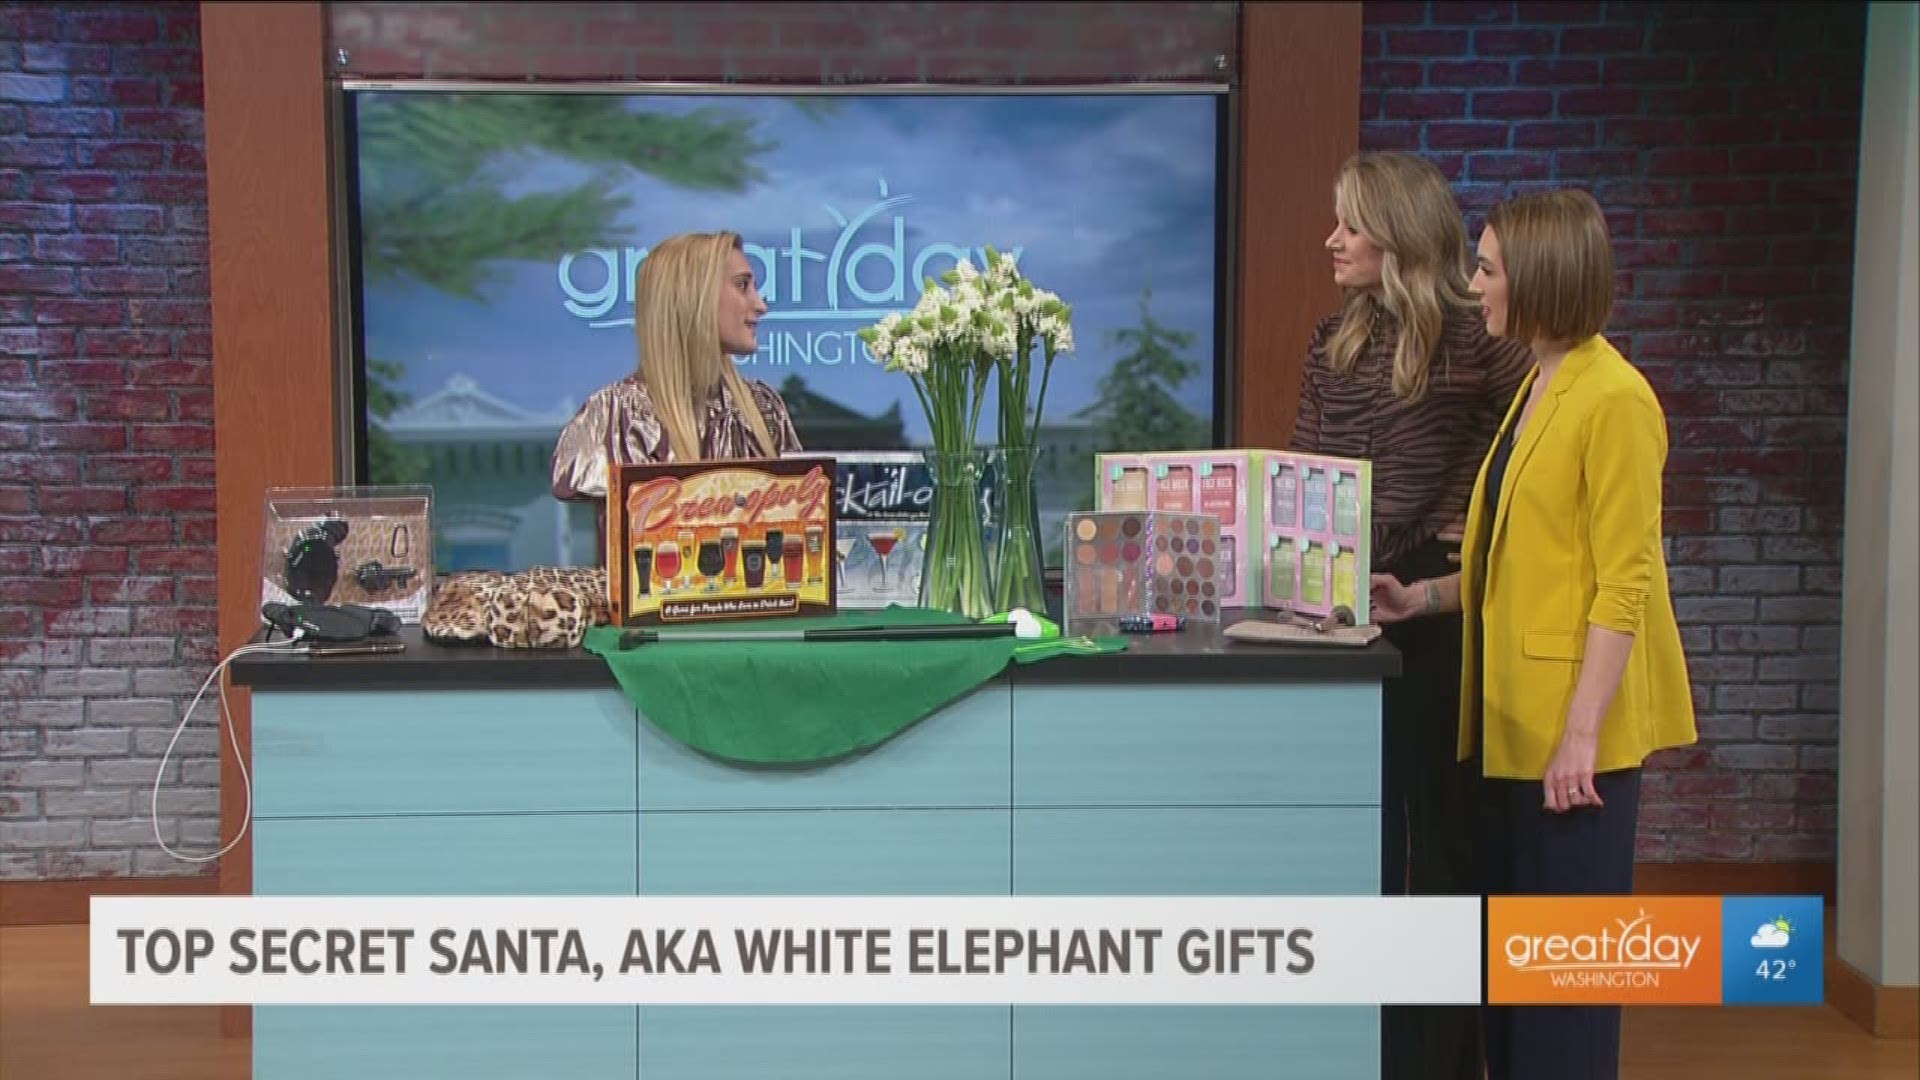 Secret Santa, aka White Elephant gifts can be hard to find, so fashion & trend expert Brittney Levine shares some amazing ideas. Follow her on IG: @brittneyhlevine